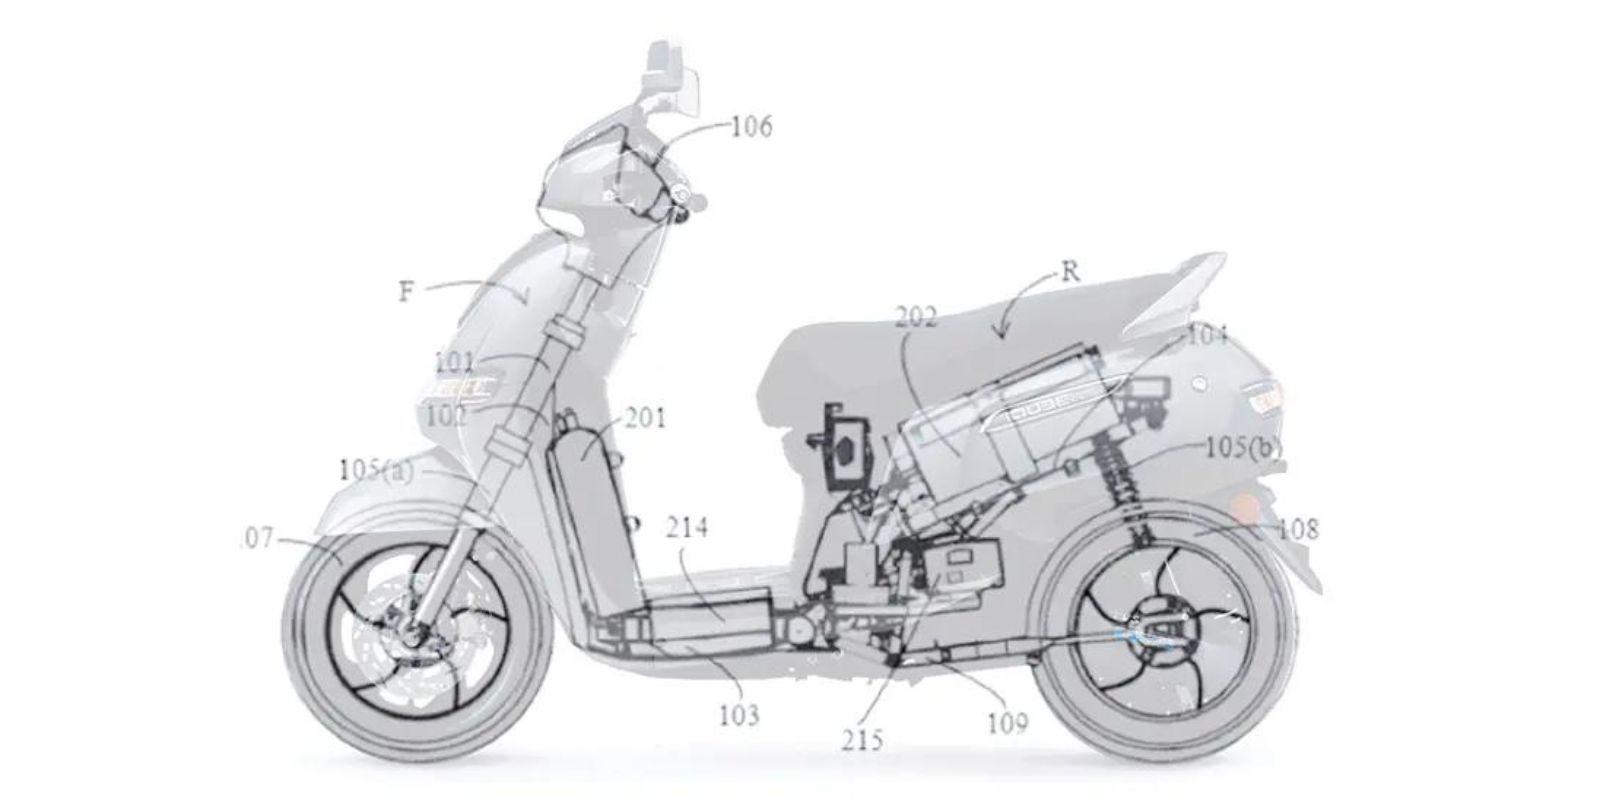 tvs iqube hydrogen fuel cell patent 1